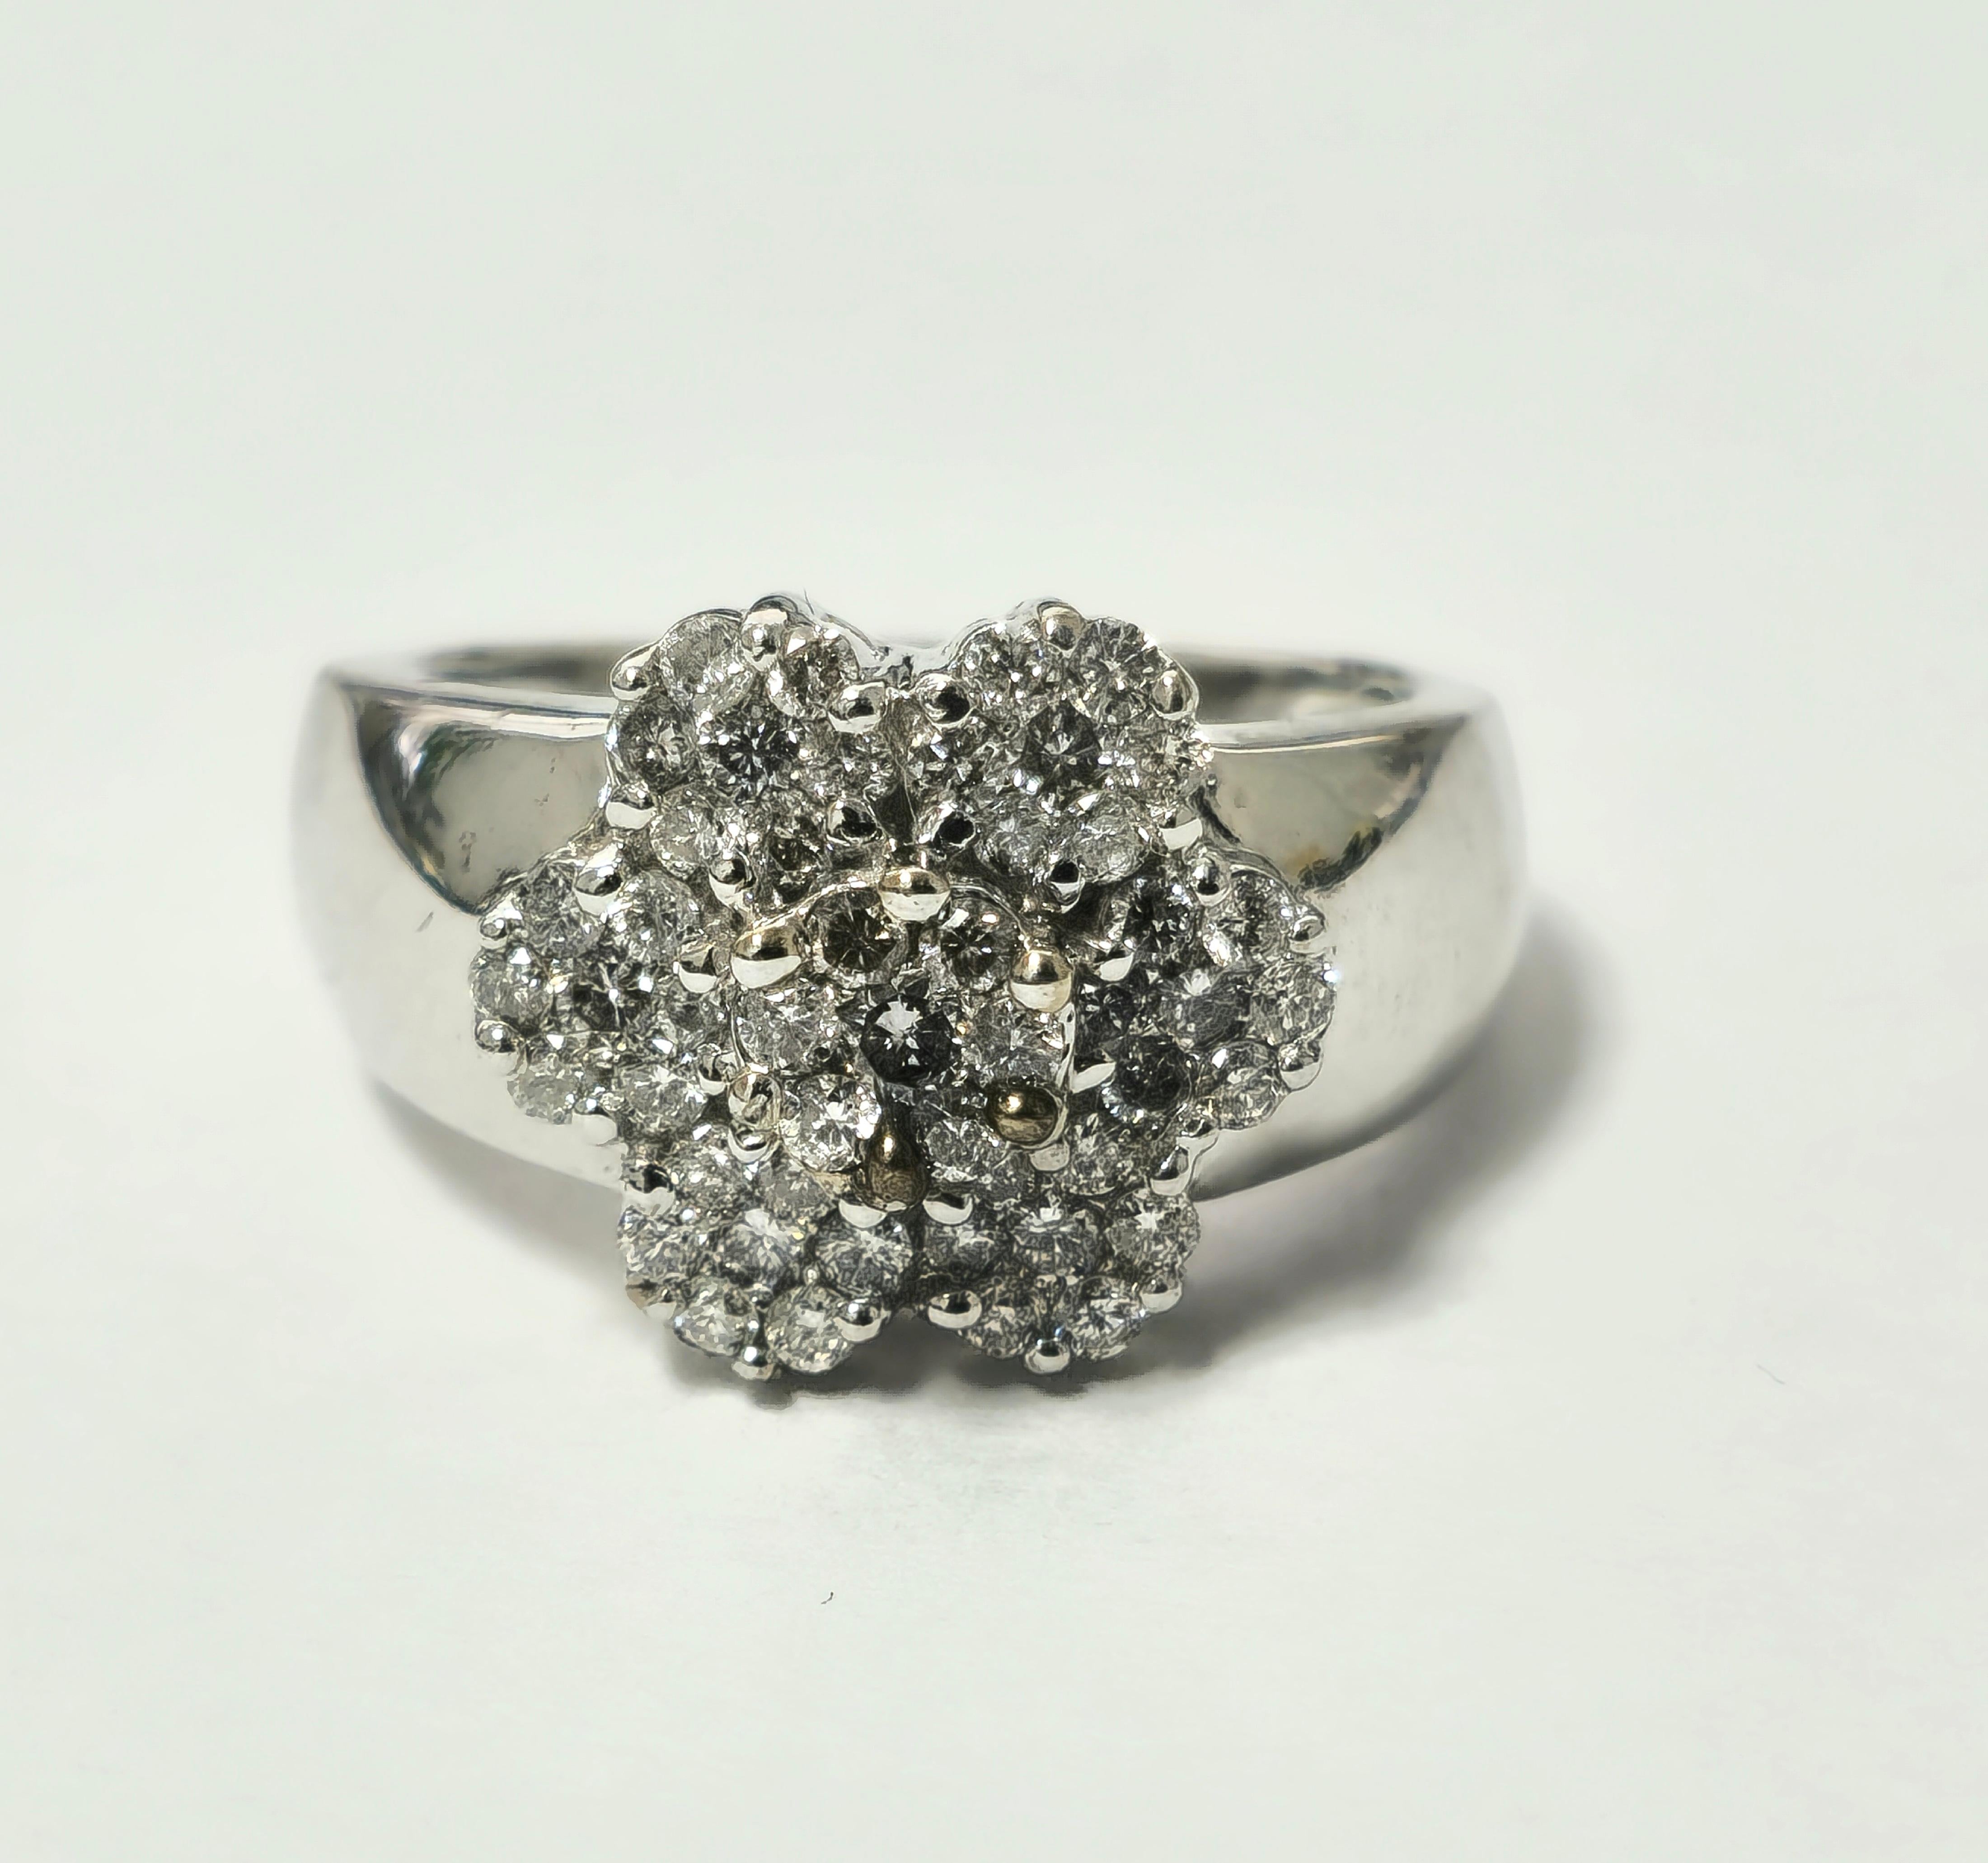 Celebrate the beauty of delicate petals with our exquisite Vintage Ladies Diamond Ring, crafted from 14kt white gold. Adorned with round brilliant cut diamonds in a prong setting, this stunning piece radiates elegance and charm.

Key Features:

14kt